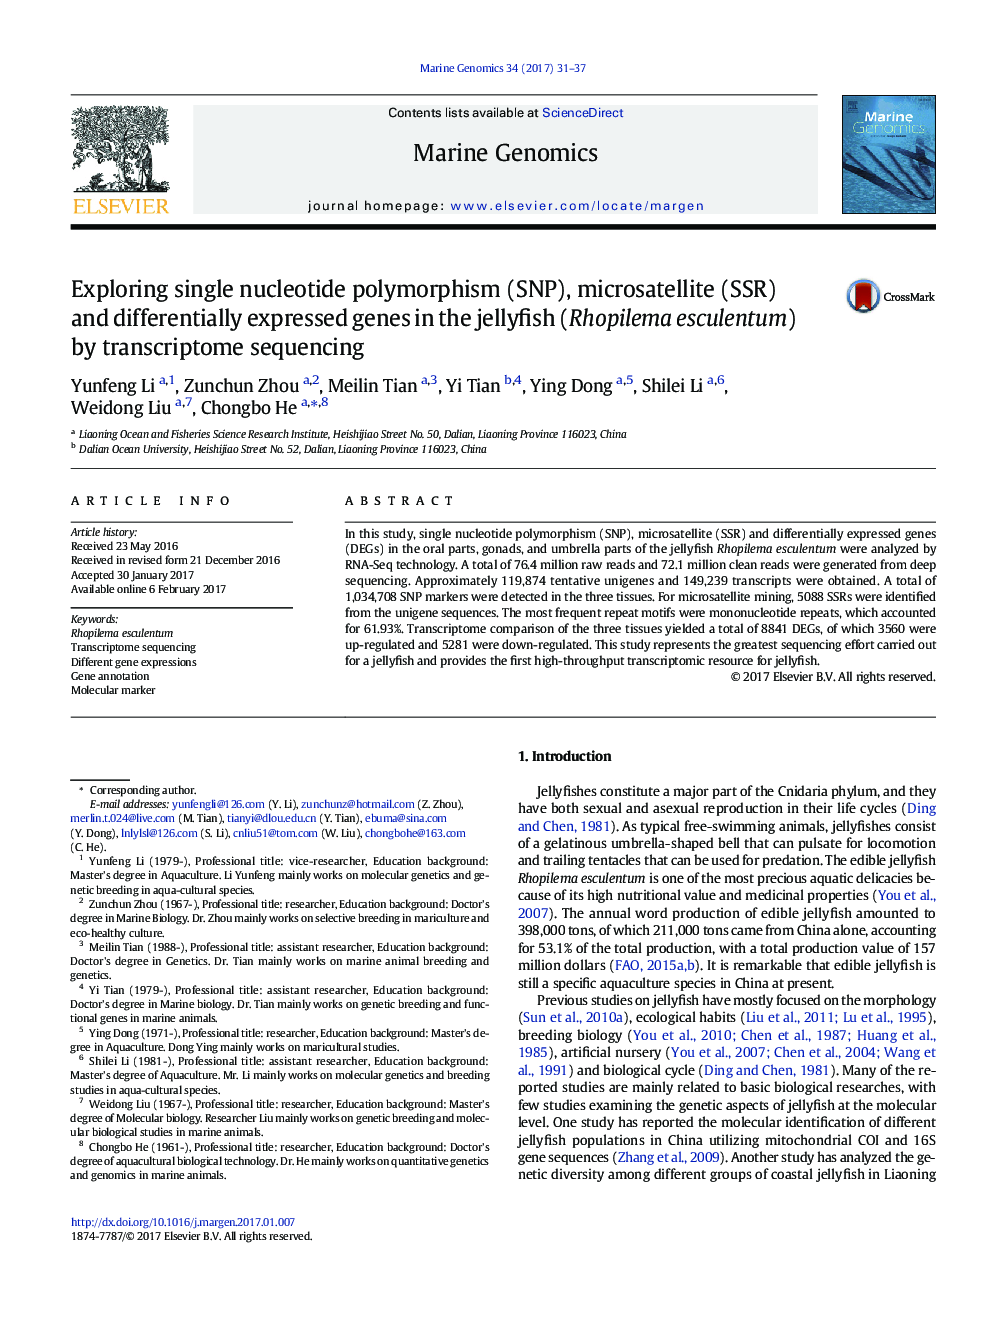 Exploring single nucleotide polymorphism (SNP), microsatellite (SSR) and differentially expressed genes in the jellyfish (Rhopilema esculentum) by transcriptome sequencing